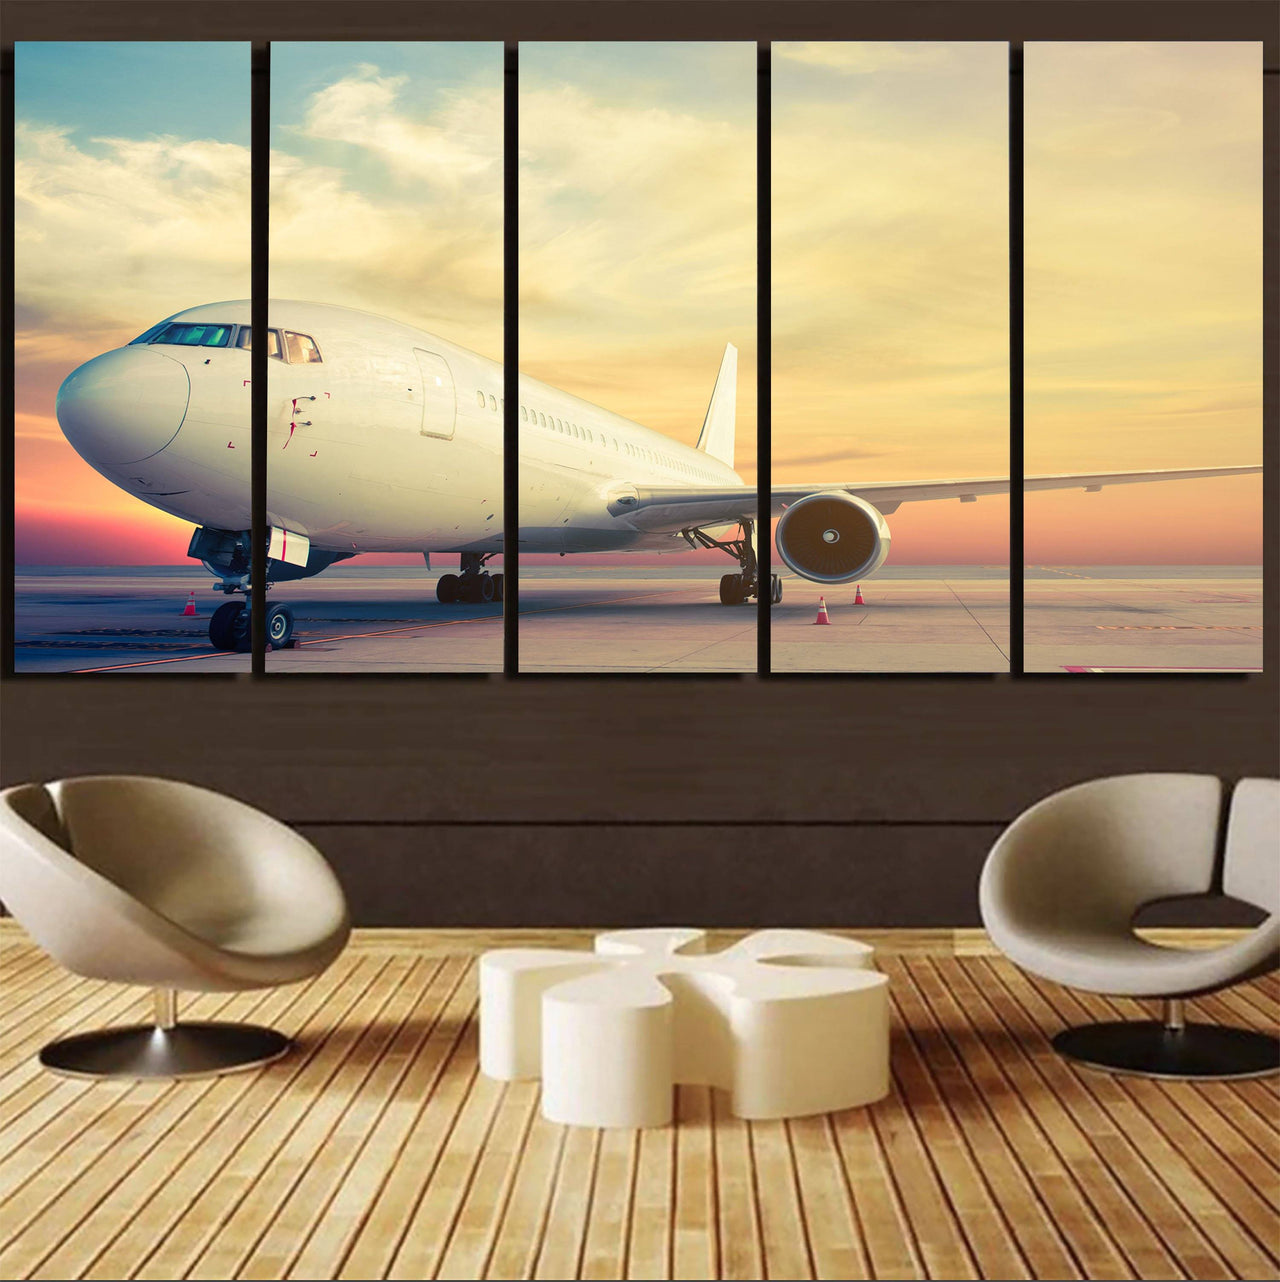 Parked Aircraft During Sunset Printed Canvas Prints (5 Pieces) Aviation Shop 